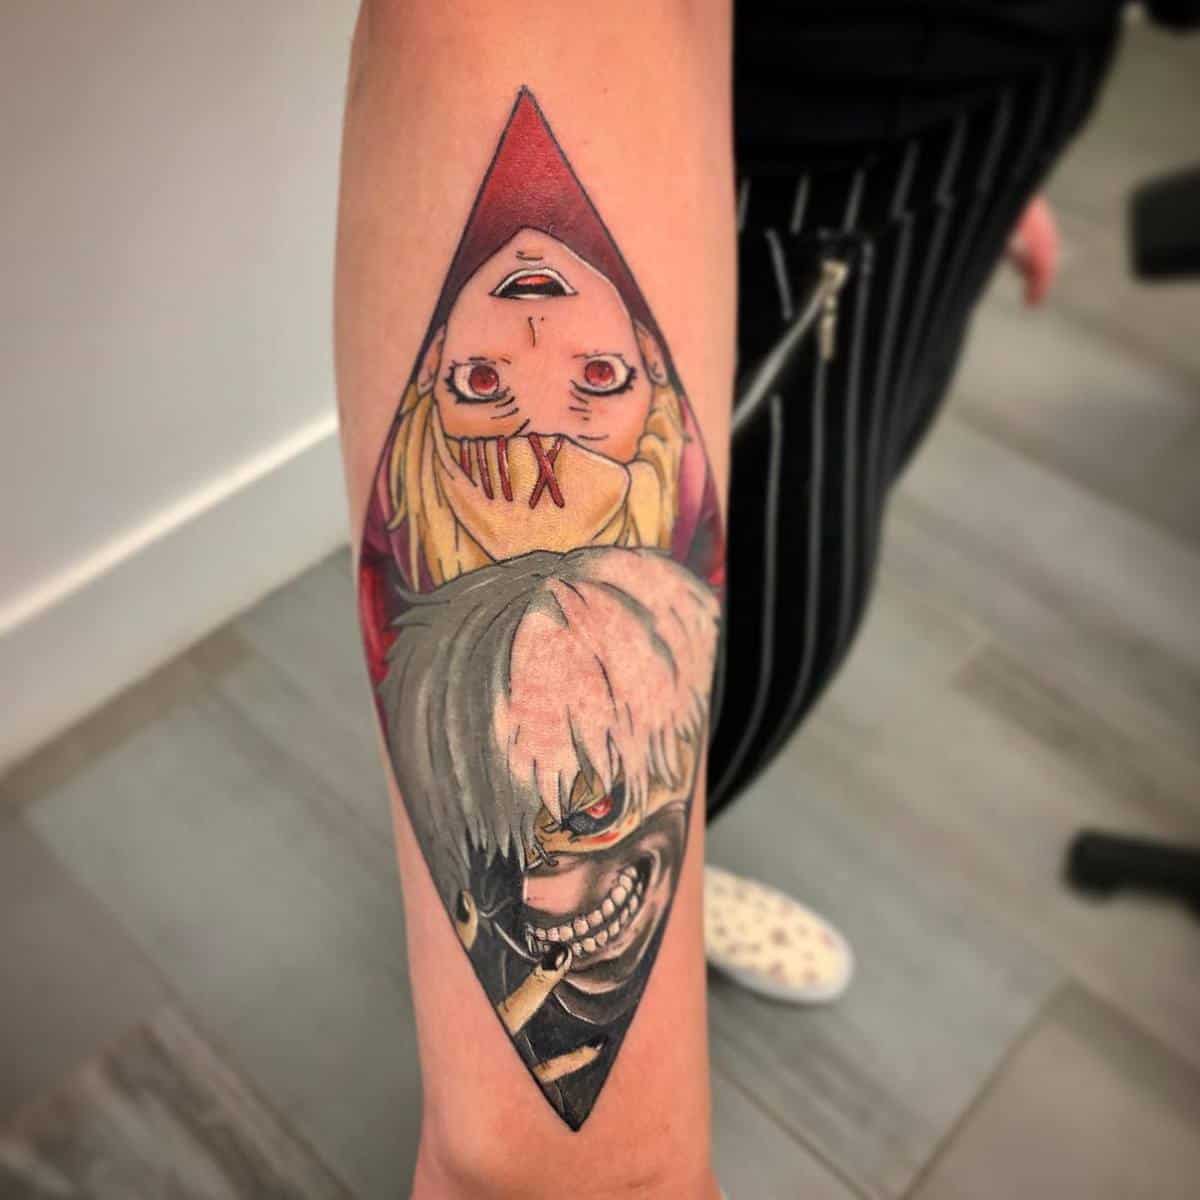 Got my first tattoo today  rTokyoGhoul